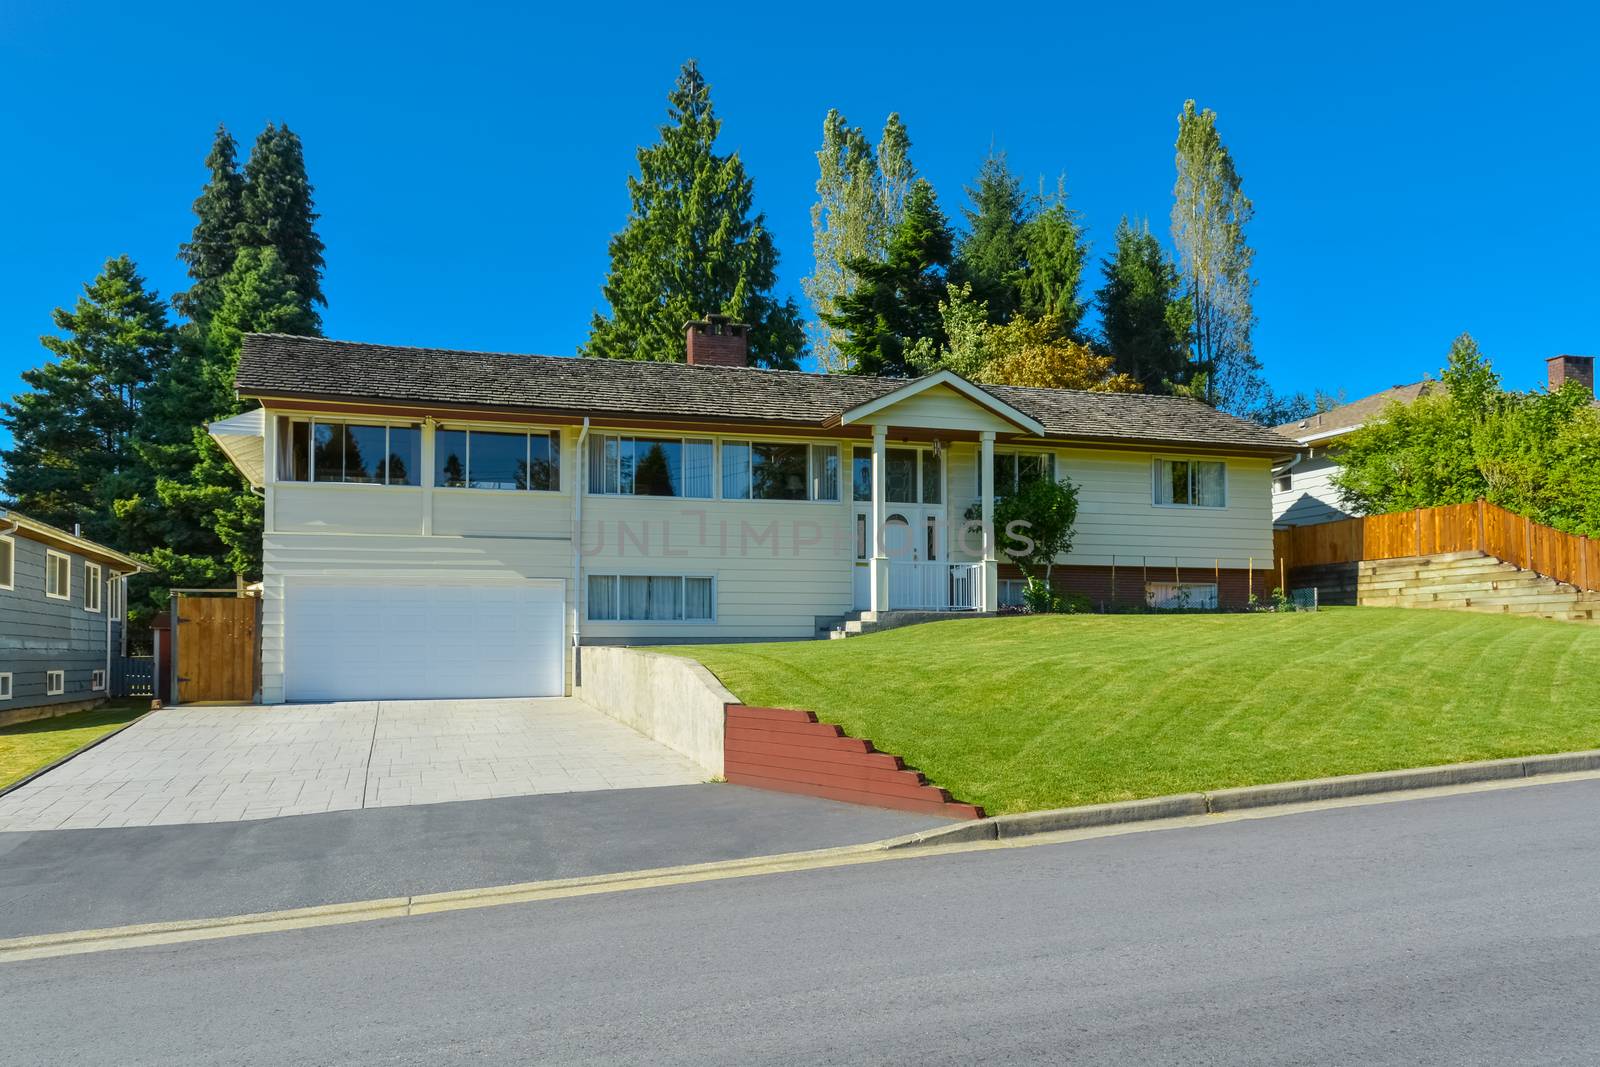 Expanded family house with wide garage, concrete driveway and mowed lawn on the front yard